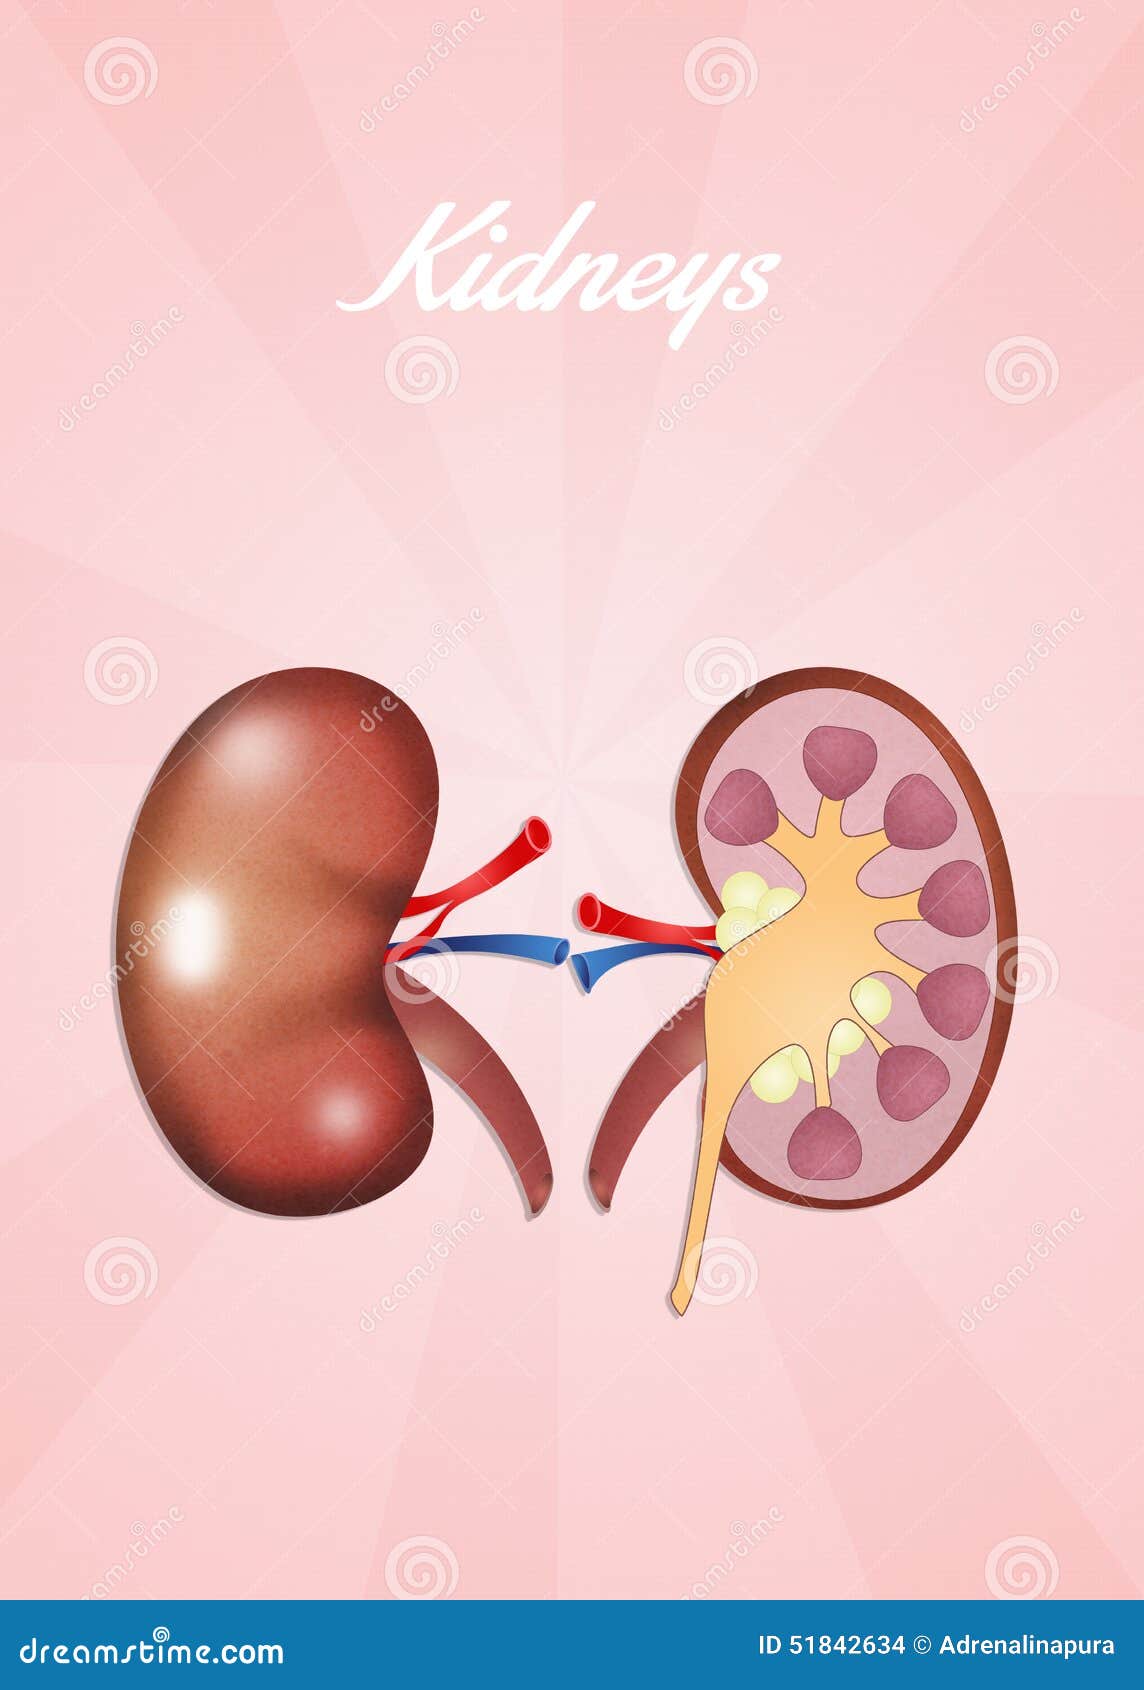 funny kidney clipart - photo #34